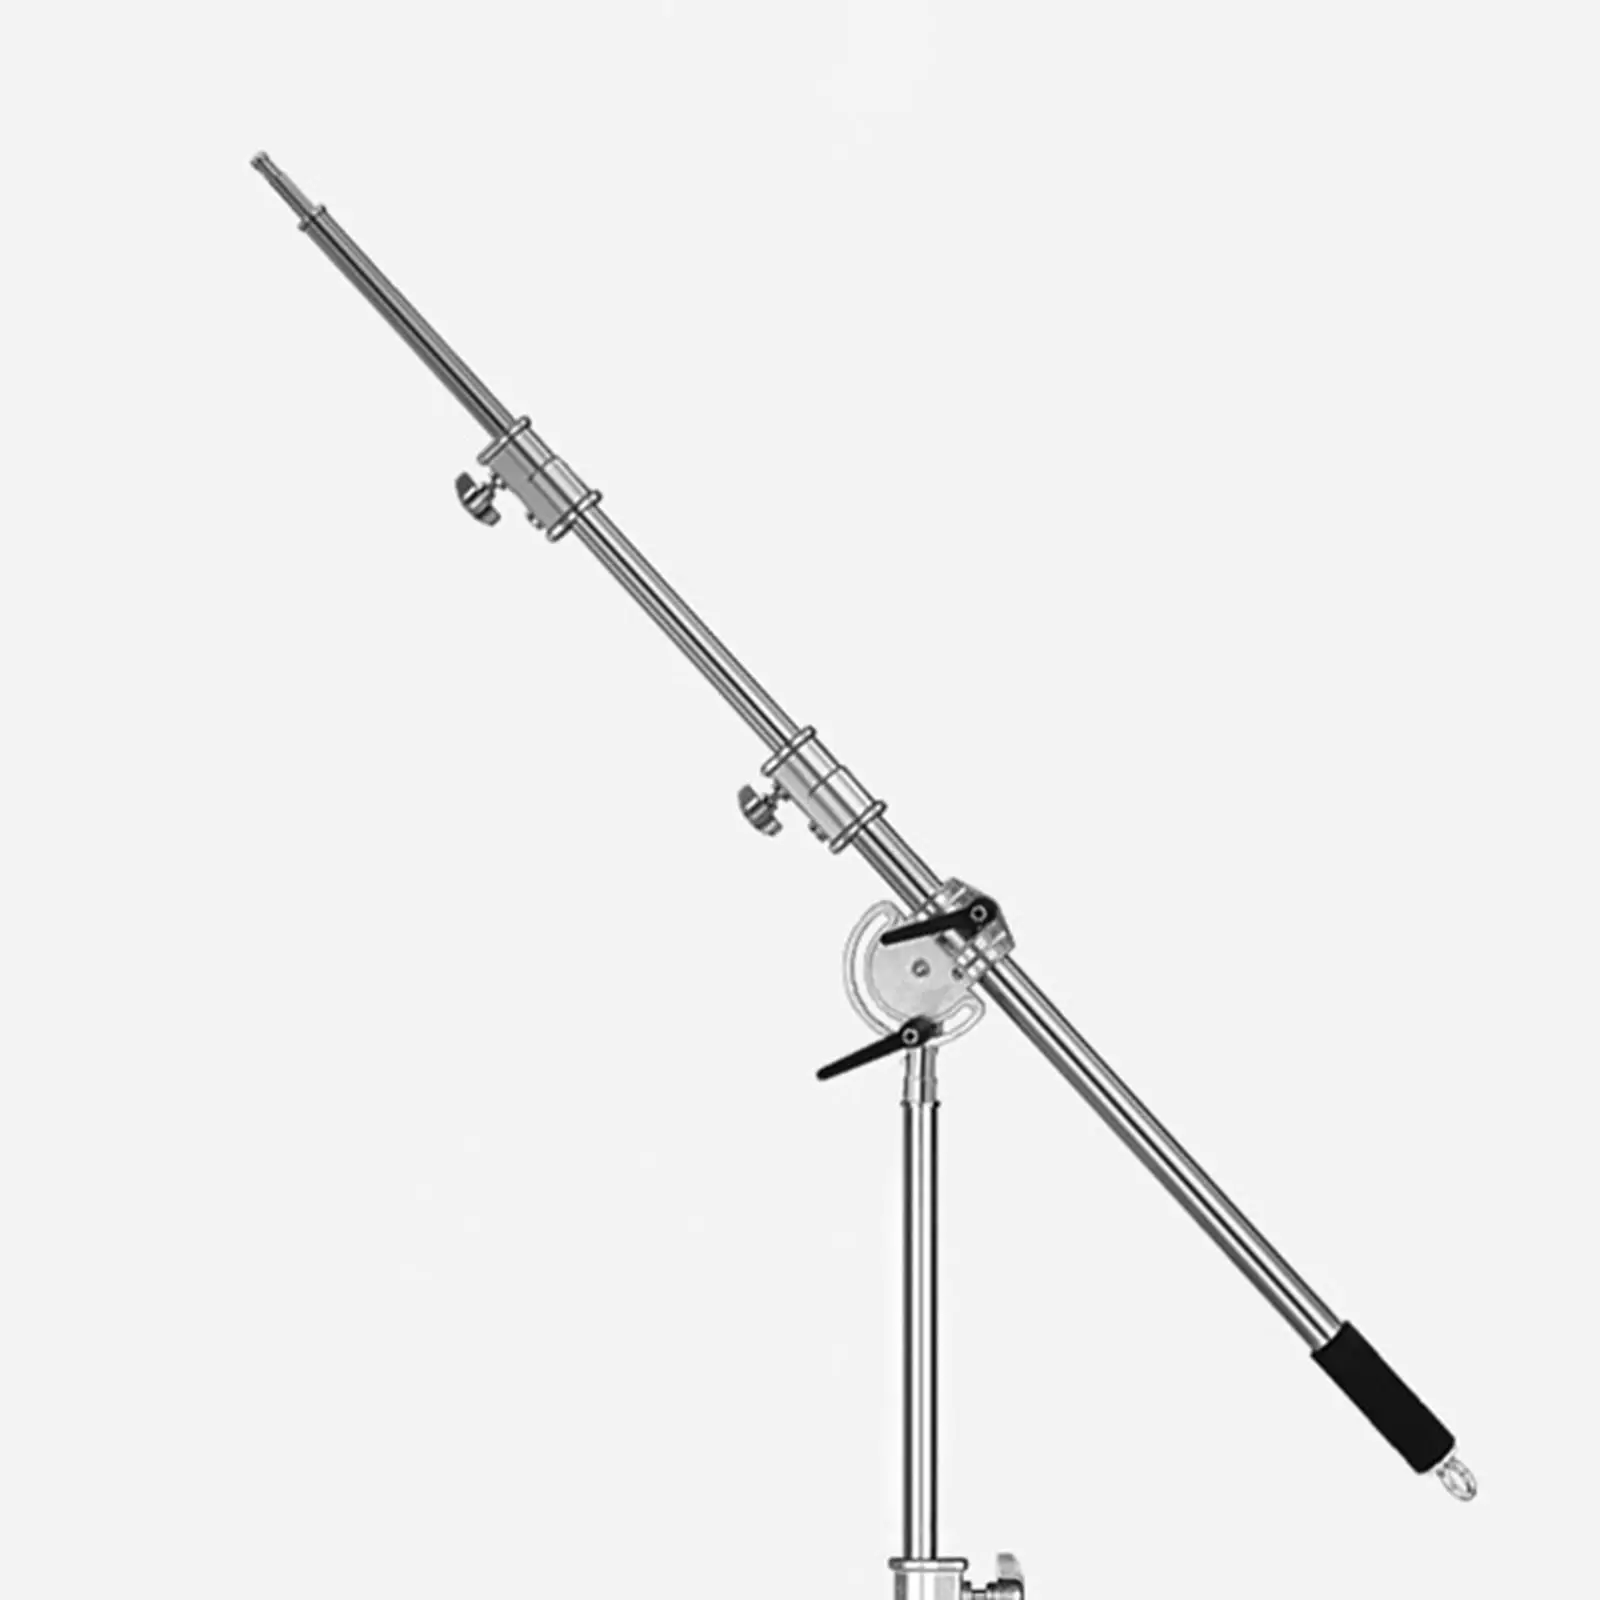 Photo Studio Boom Arm Stud Adapter Lighting Mount Compatible with Tripod Stand Cross Arm Bar Hair Lights Portrait Photography